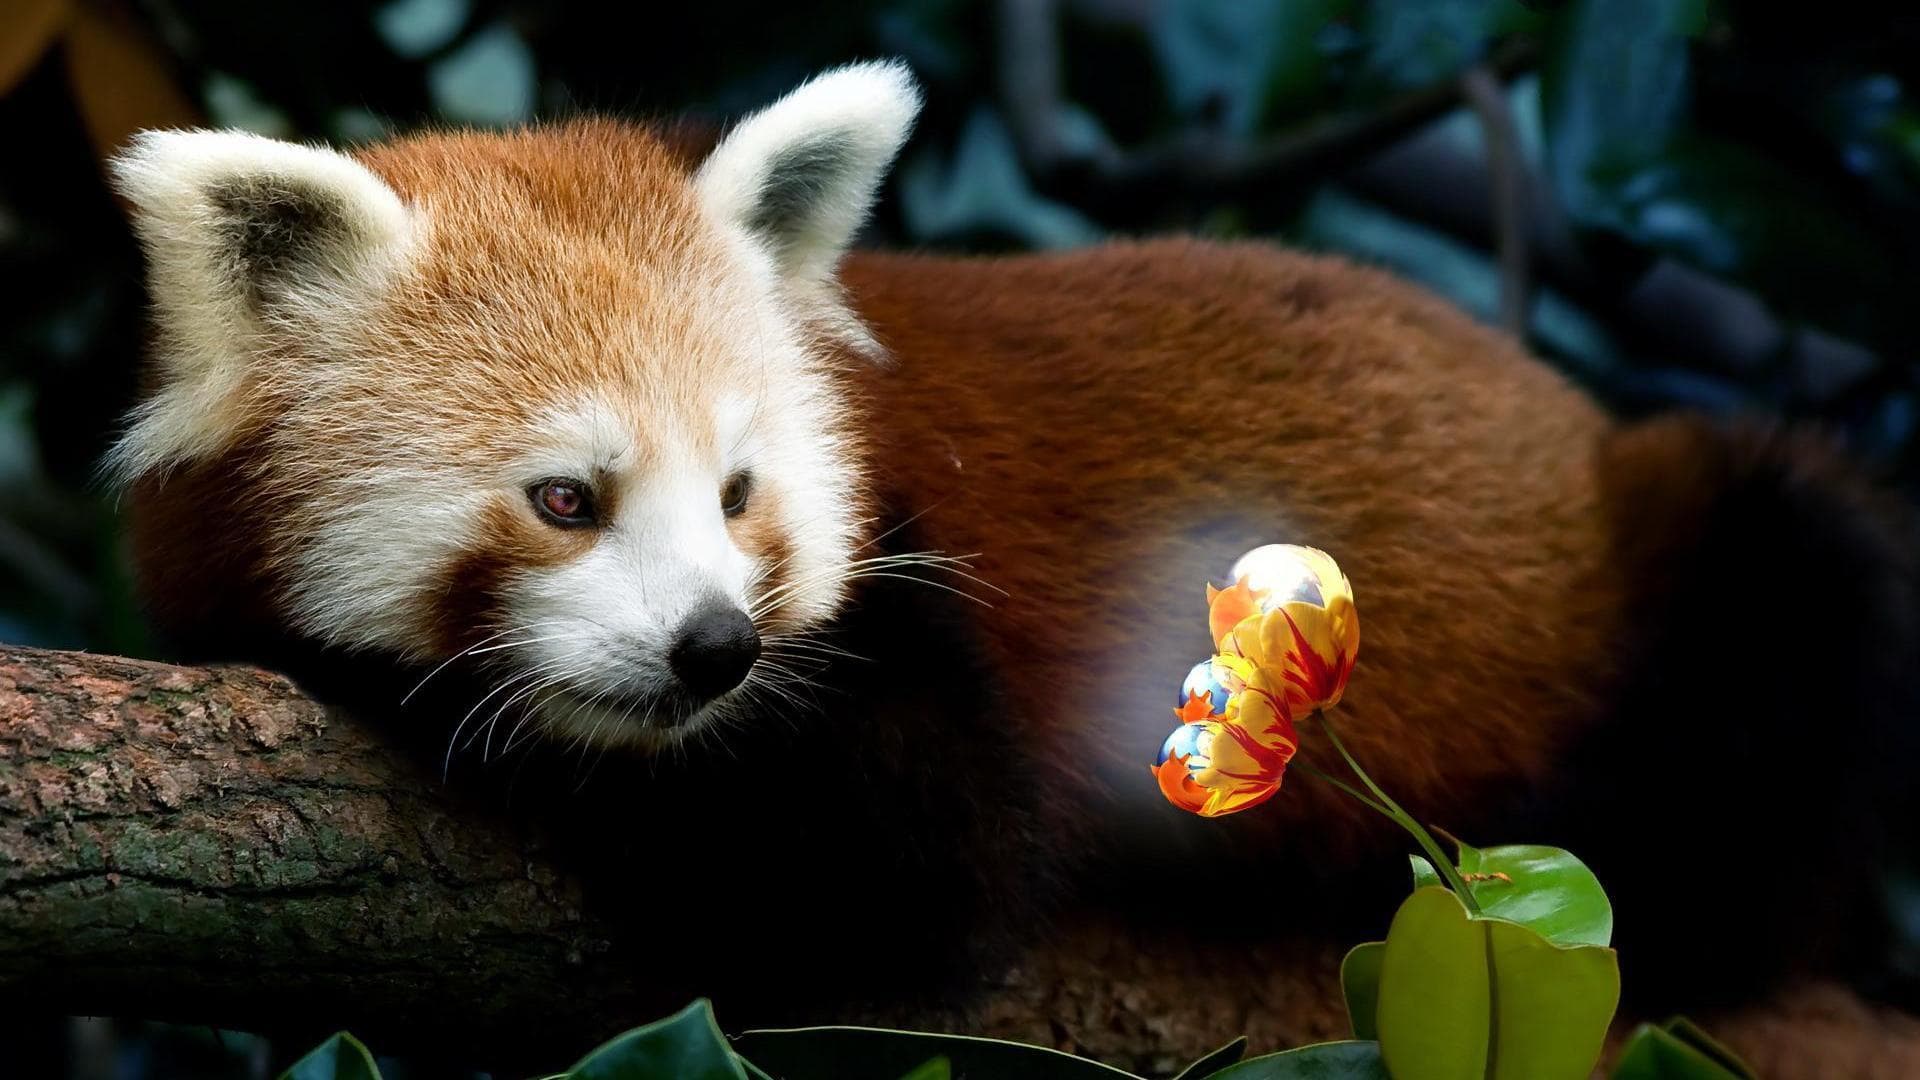 Cool Red Panda Wallpapers - Top Free Cool Red Panda Backgrounds ...